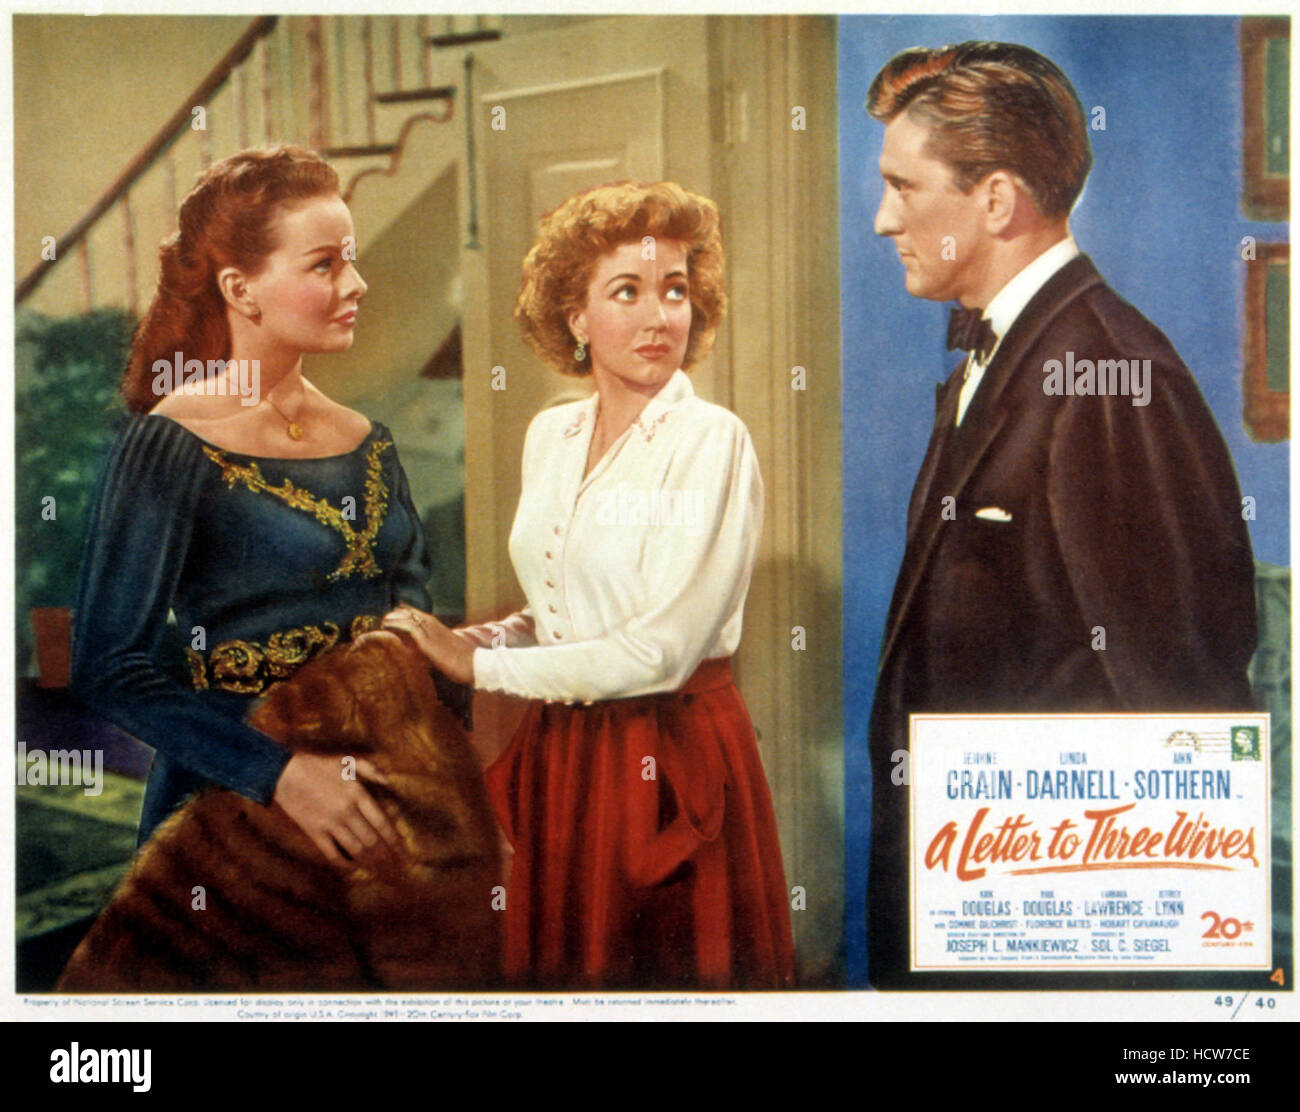 A LETTER TO THREE WIVES, Jeanne Crain, Ann Sothern, Kirk Douglas. 1949 ...